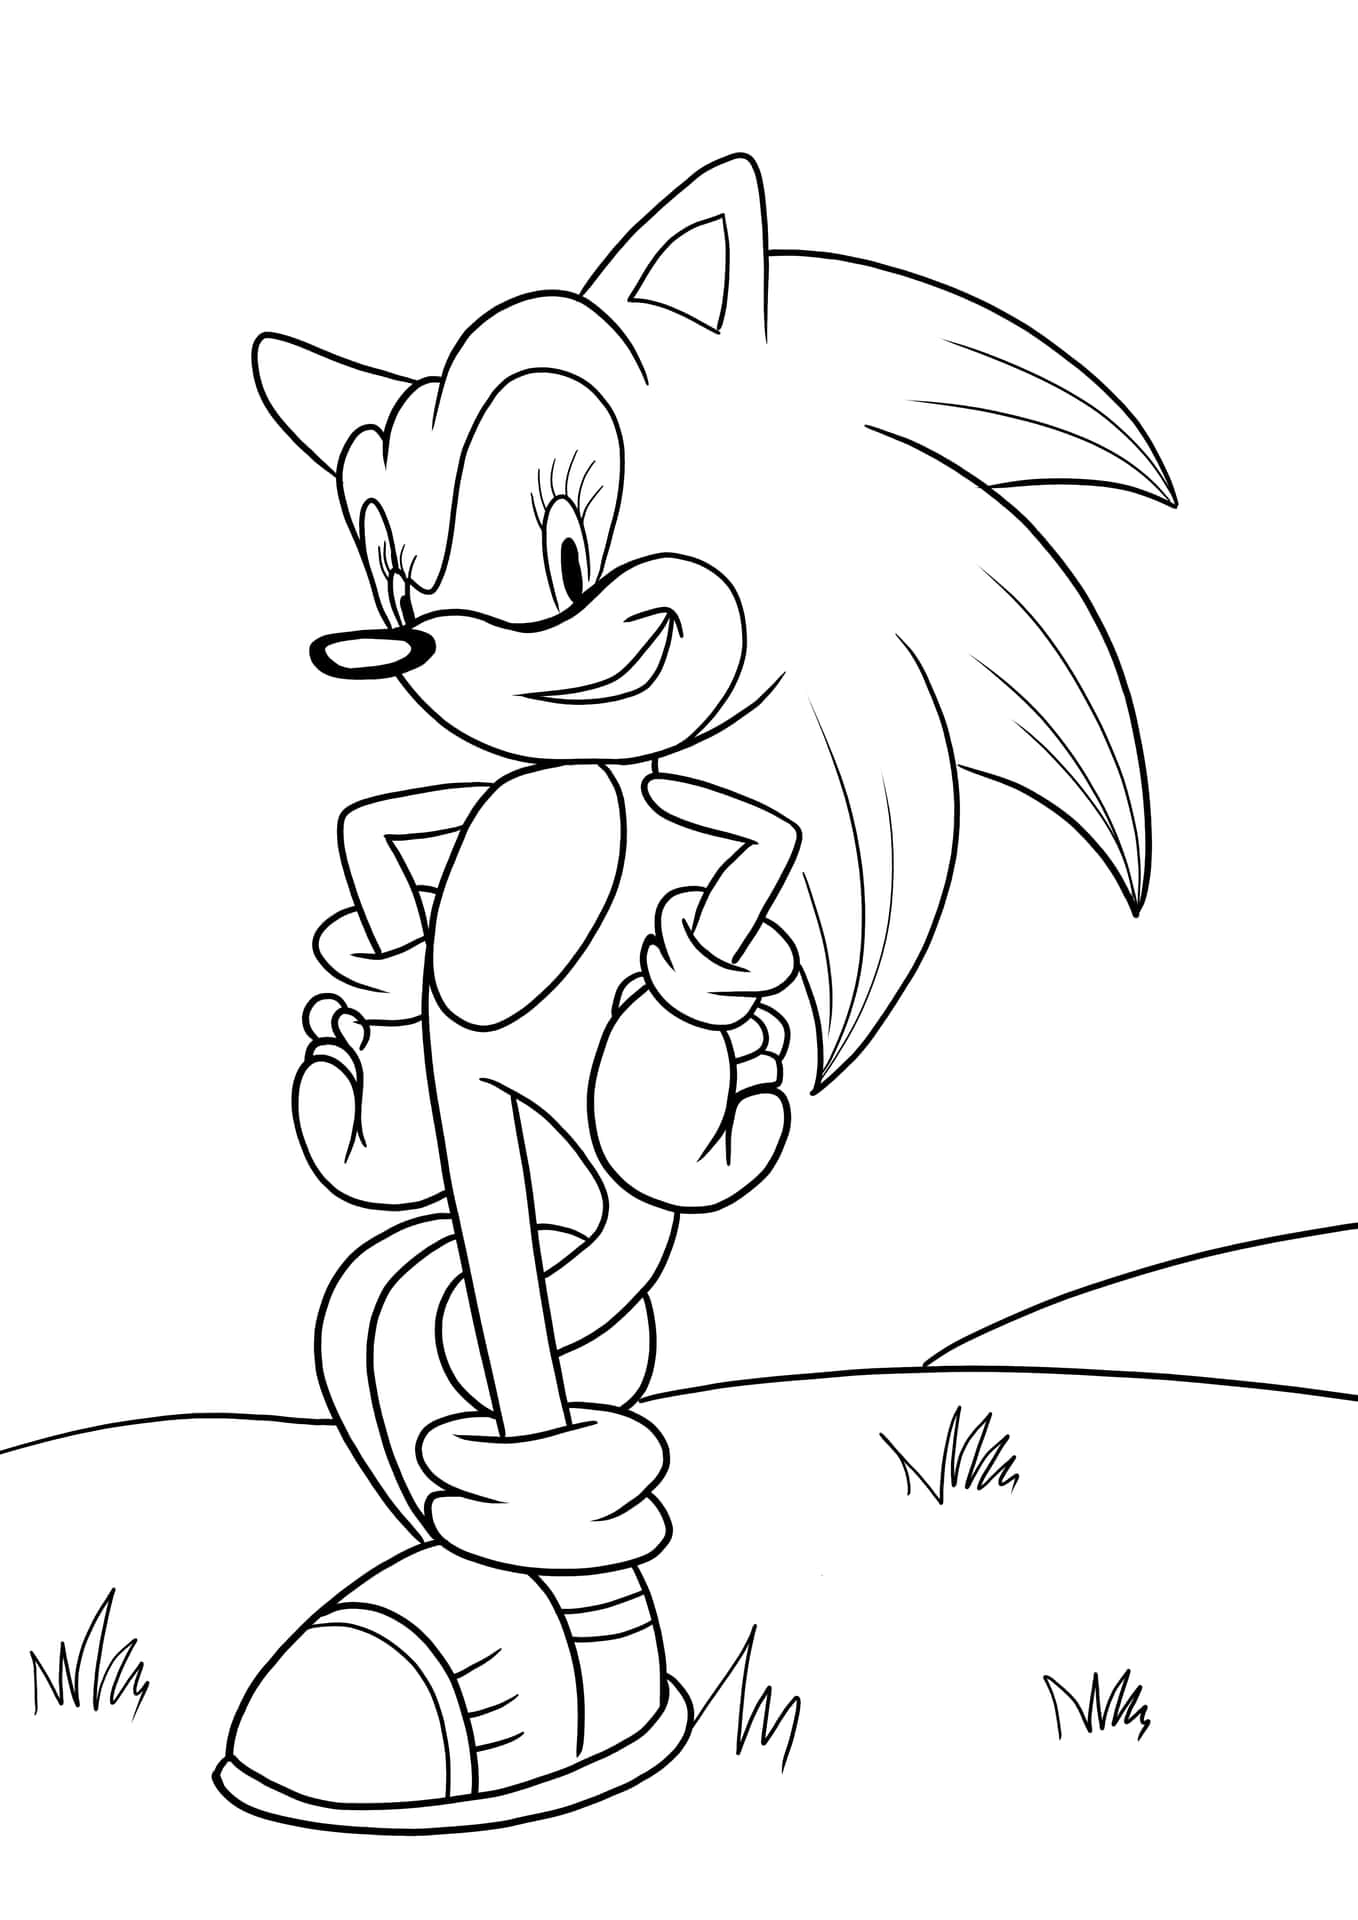 Sonic Coloring Hands On Waist Picture